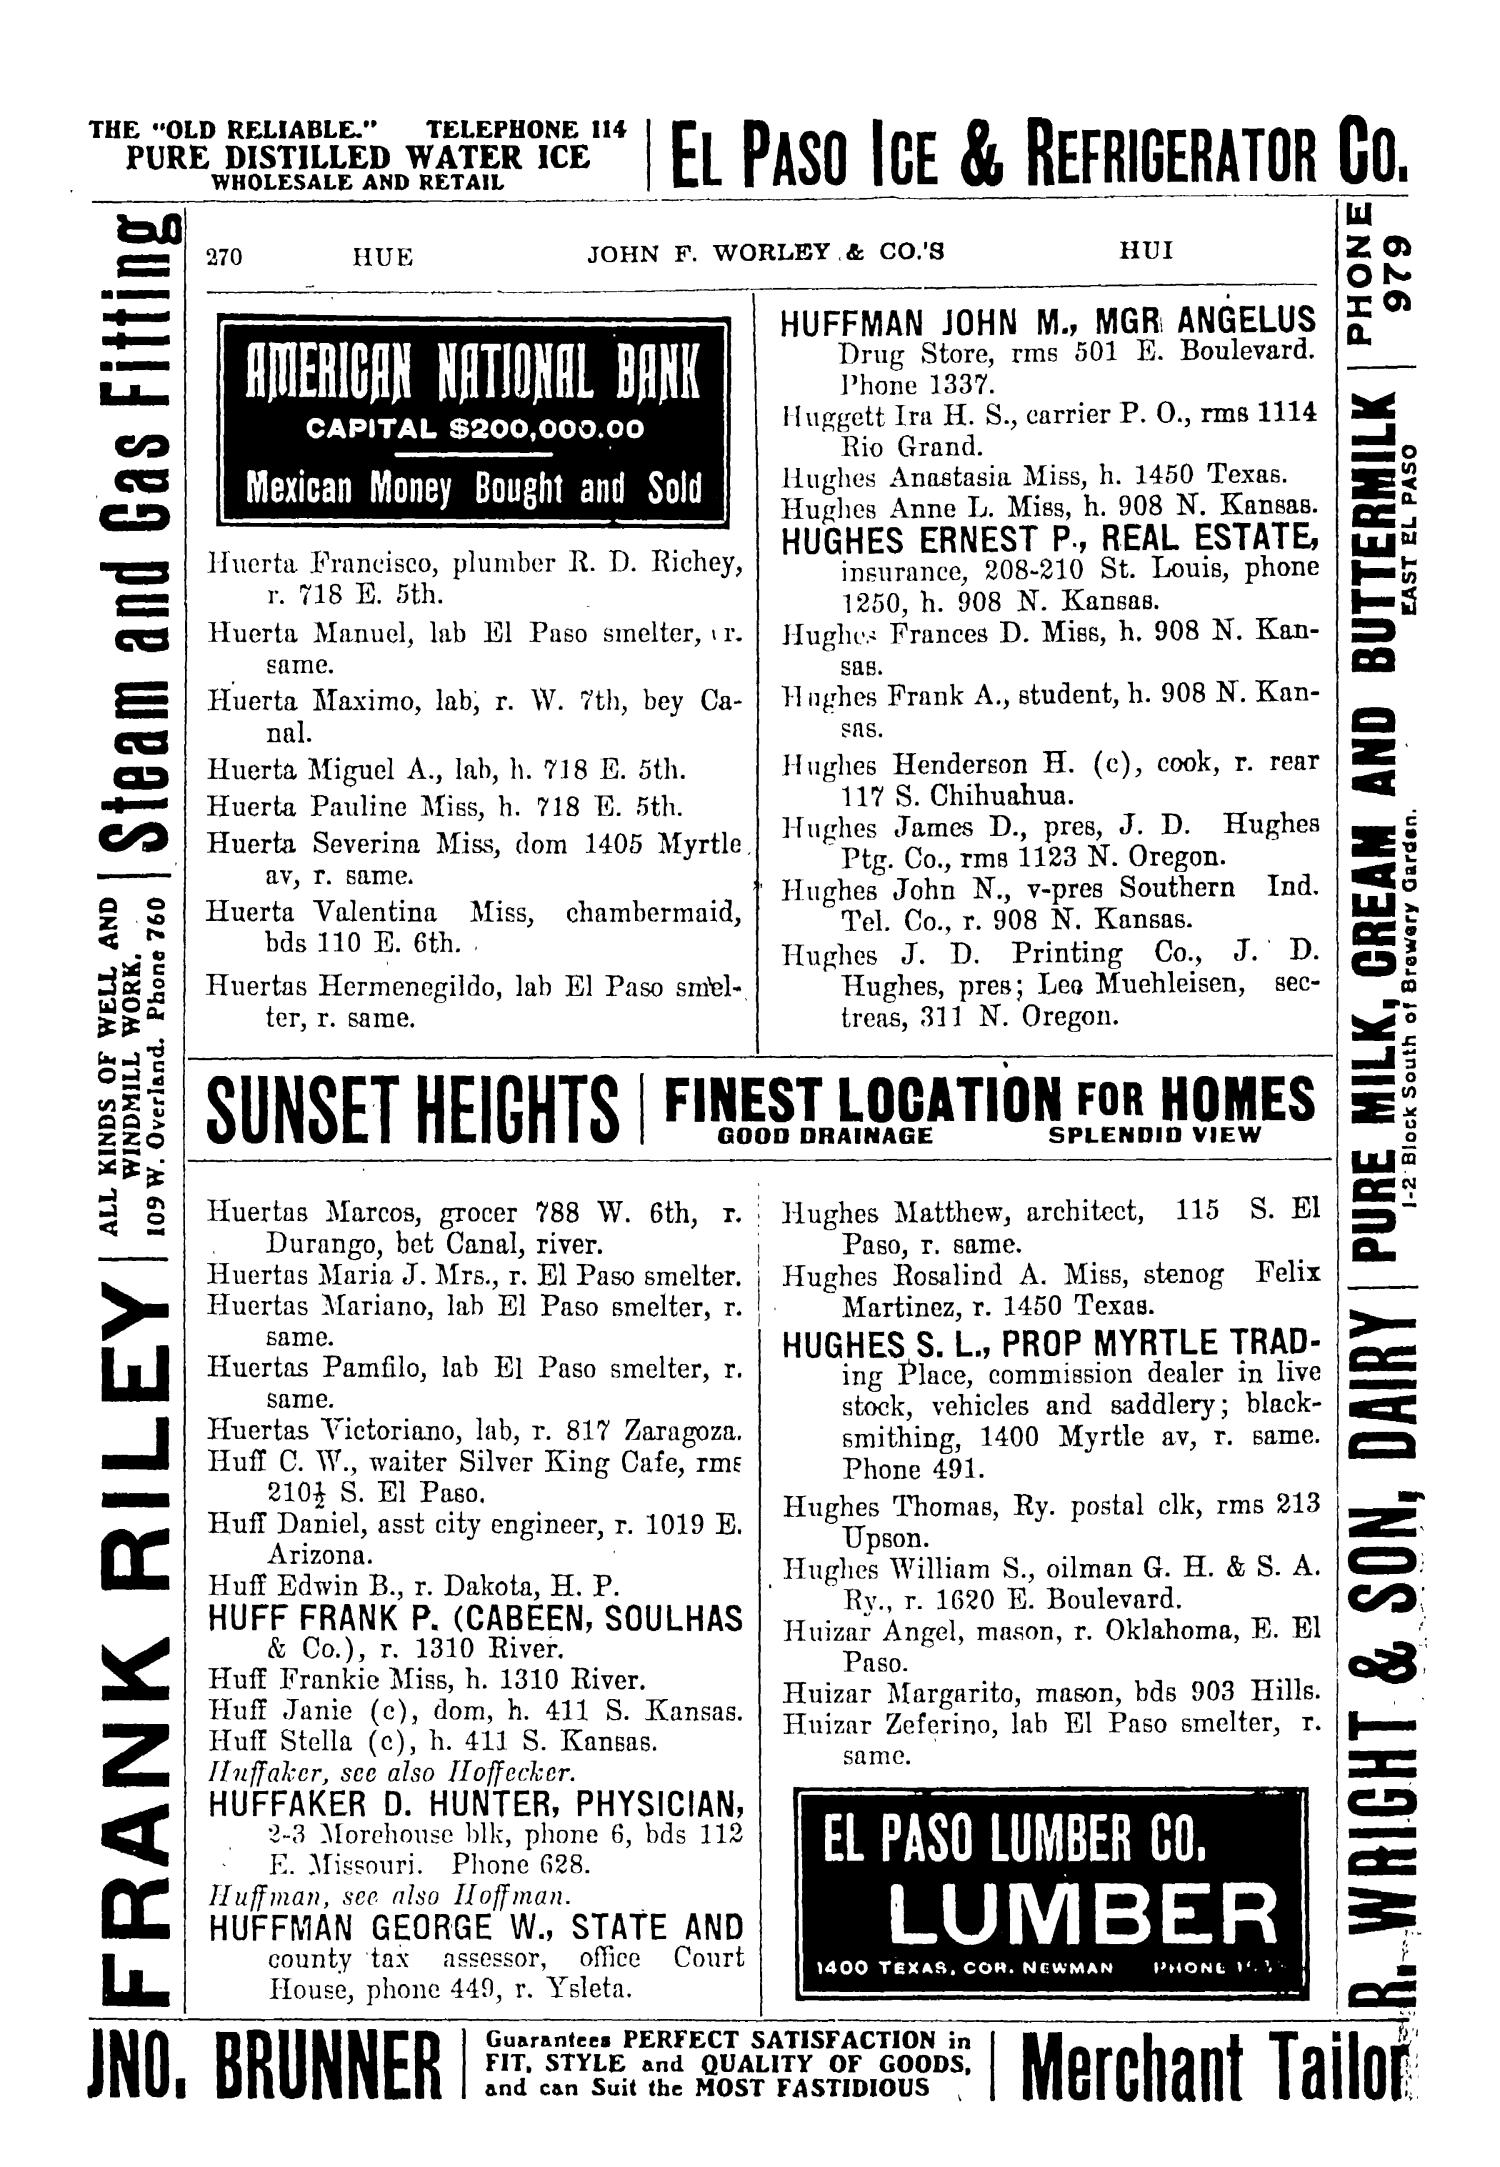 John F. Worley & Co.'s El Paso Directory for 1906
                                                
                                                    270
                                                